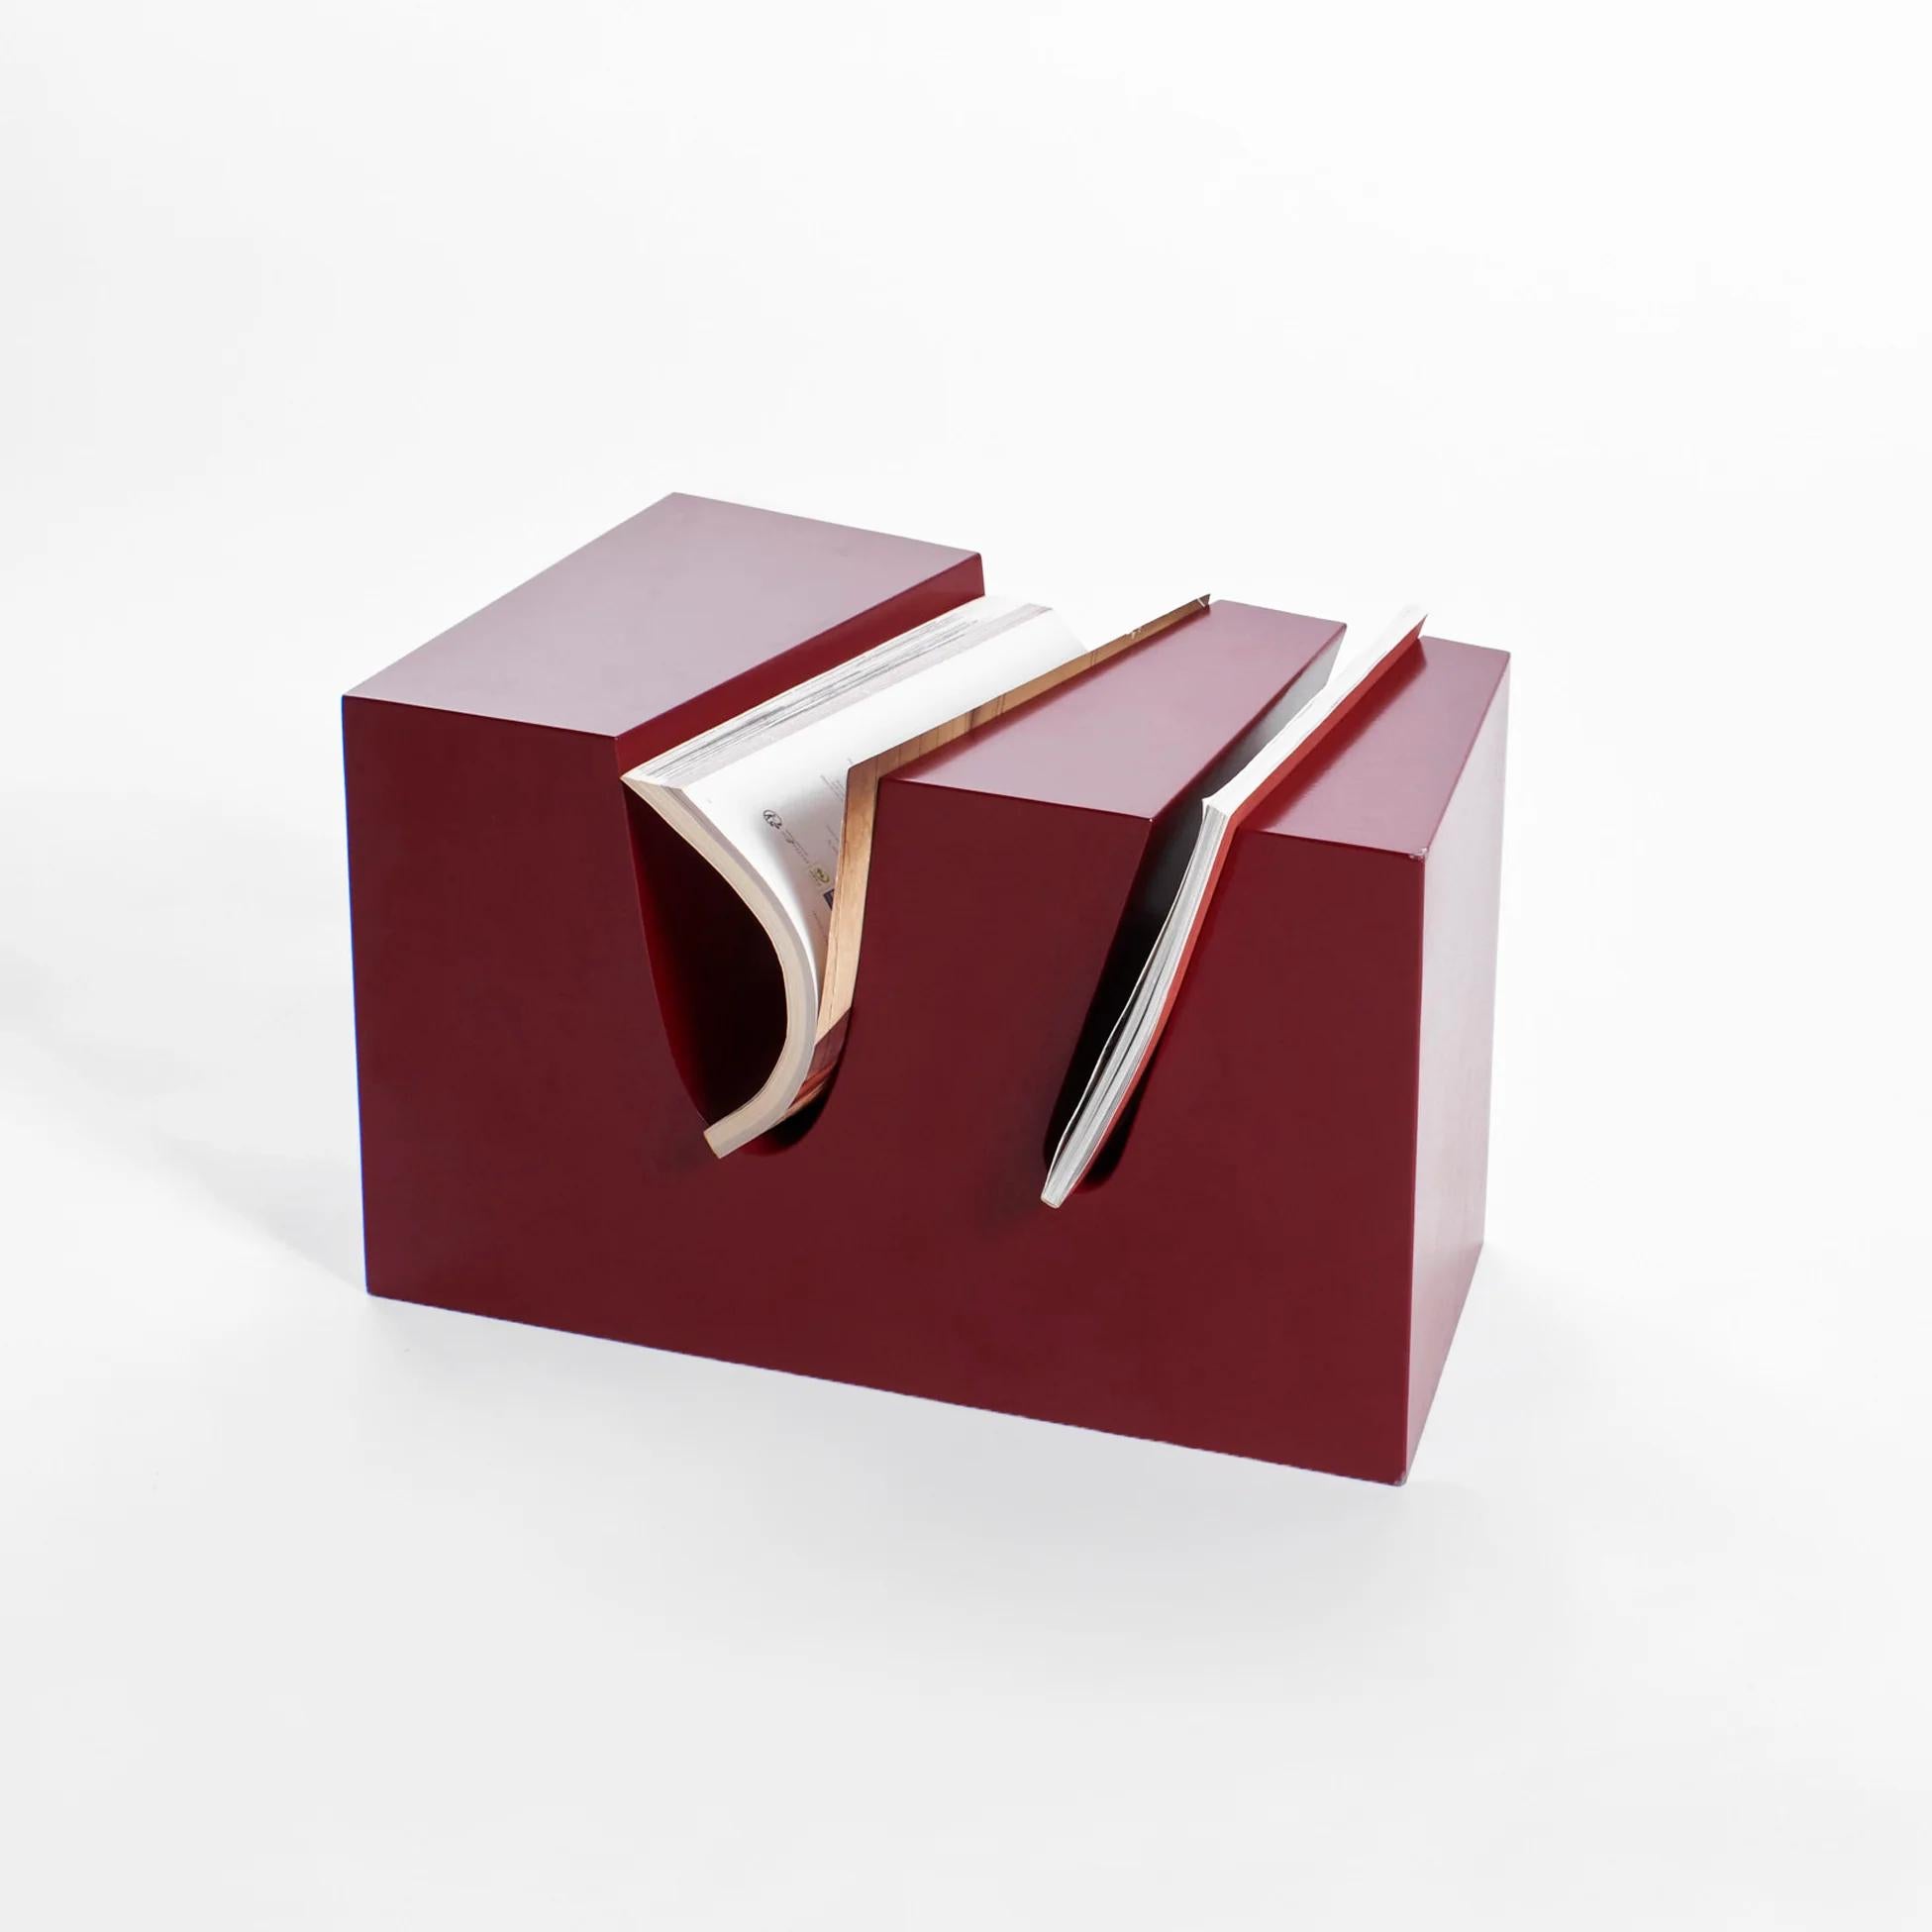 Magazine Rack by Project 213A
Dimensions: W 31.5 x D 52 x H 30.5 cm
Materials: Powder Coated Metal

The asymmetrical shape of this magazine rack makes this piece an eye-catching addition to your interior. It can be used as an additional side